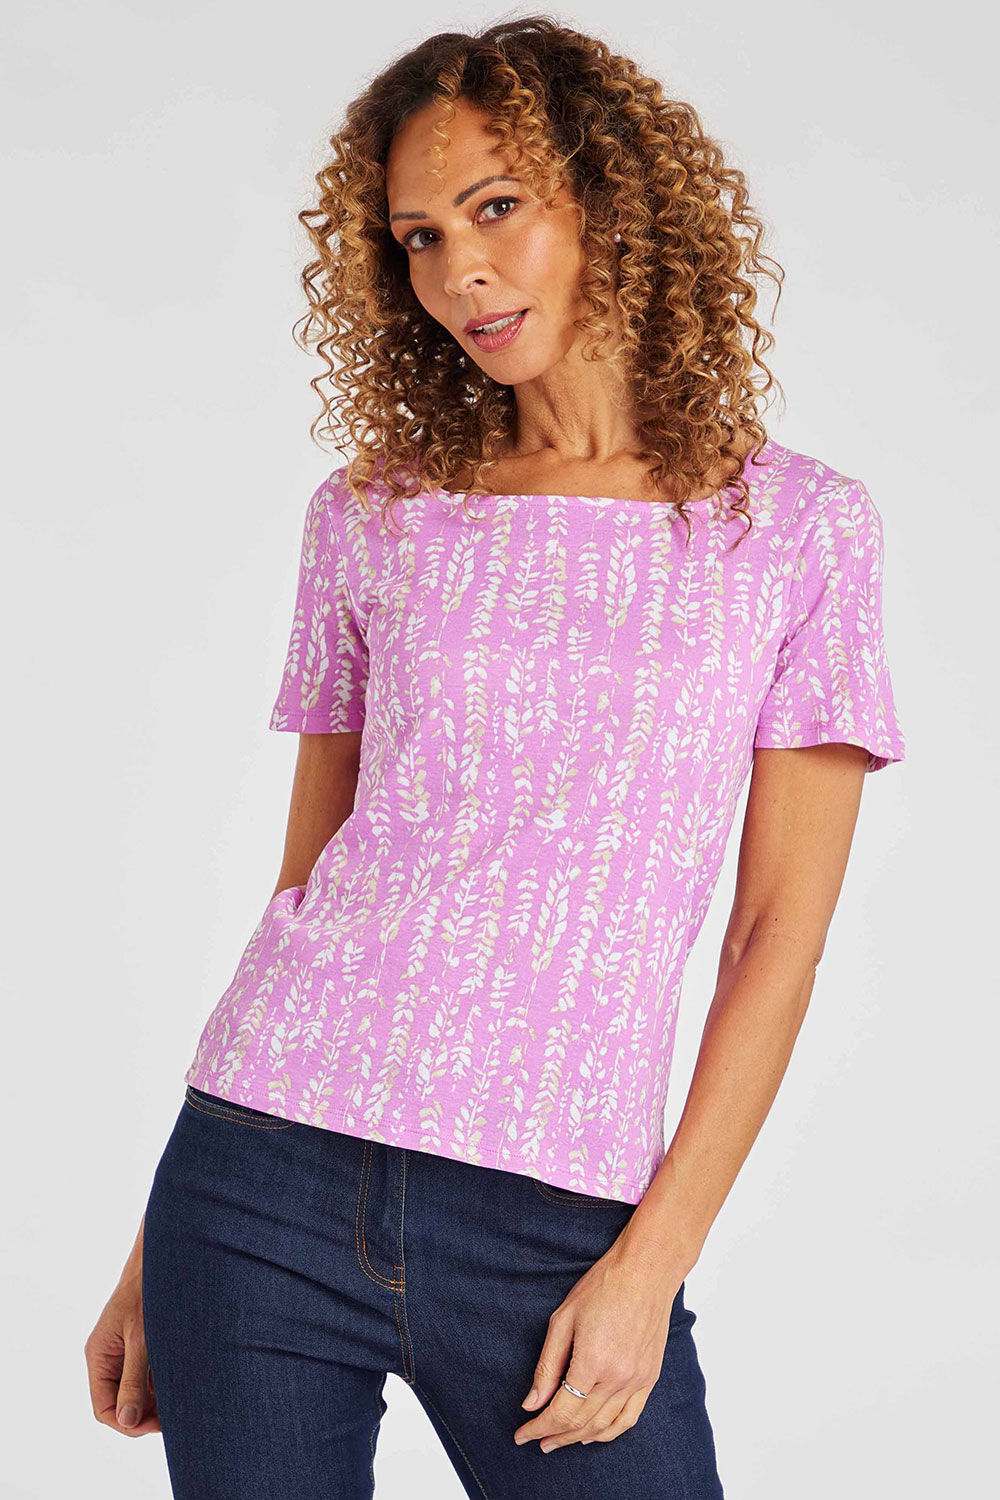 Bonmarche Pink/White Short Sleeve Wild Seed Printed Square Neck Top, Size: 24